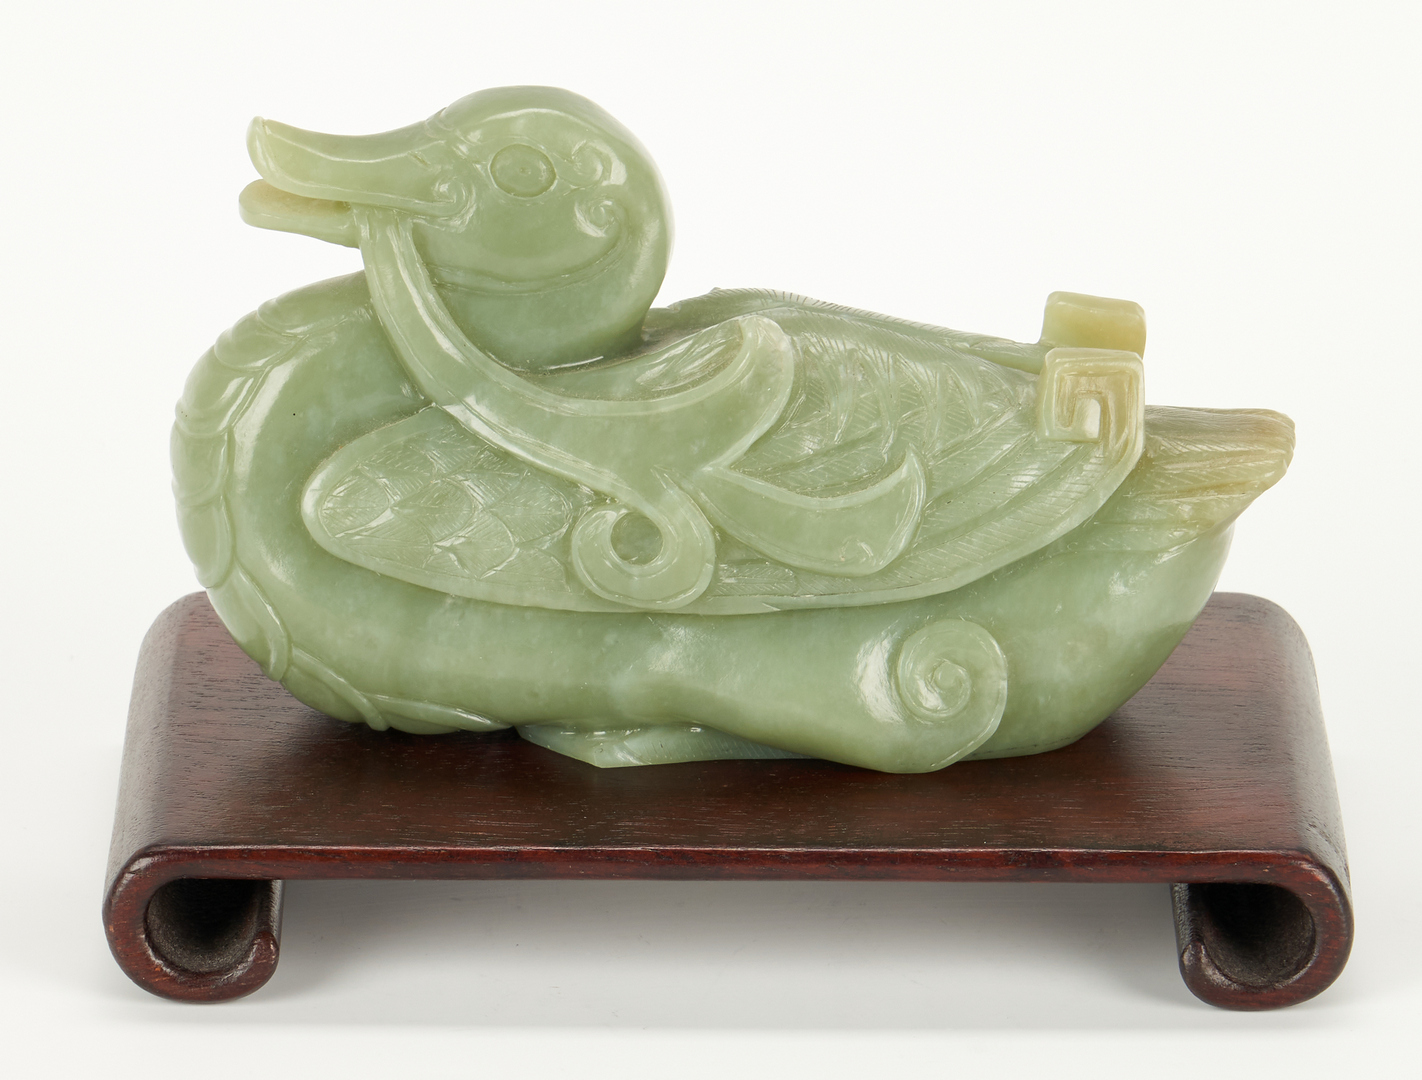 Lot 13: Chinese Carved Jade Duck and Plaques, 7 items